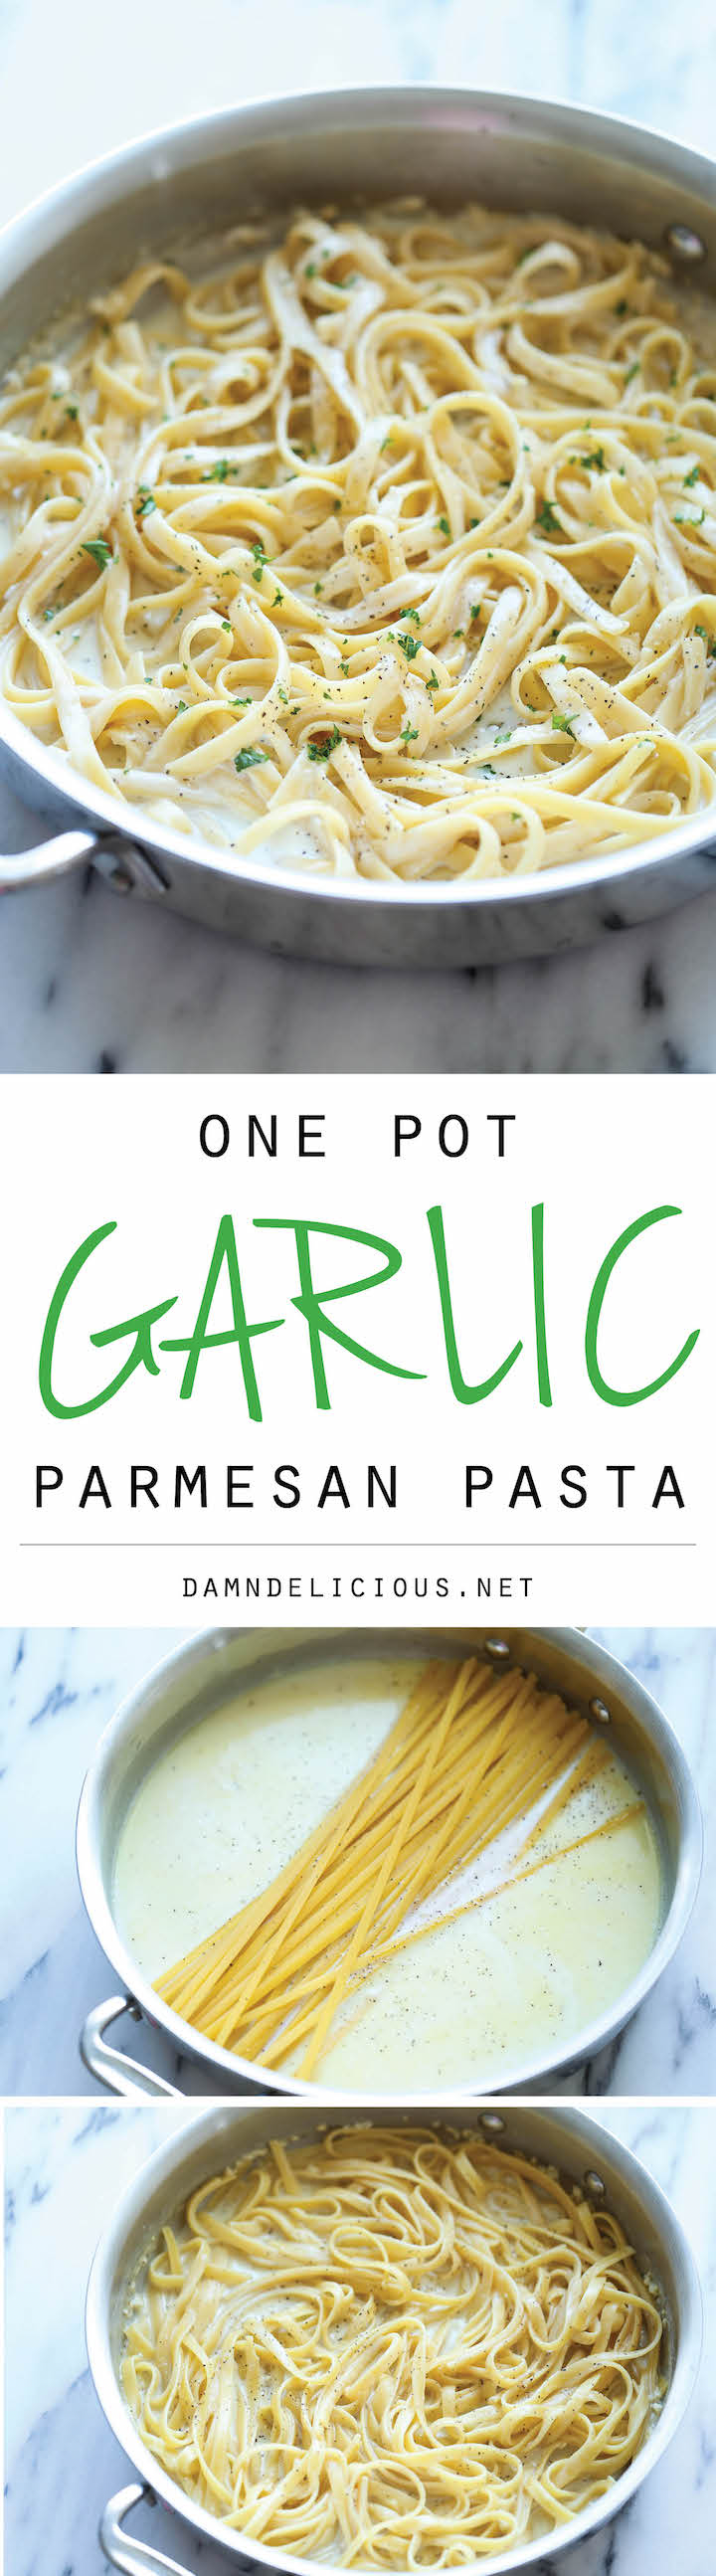 One Pot Garlic Parmesan Pasta - The easiest and creamiest pasta made in a single pot - even the pasta gets cooked right in the pan! How easy is that?